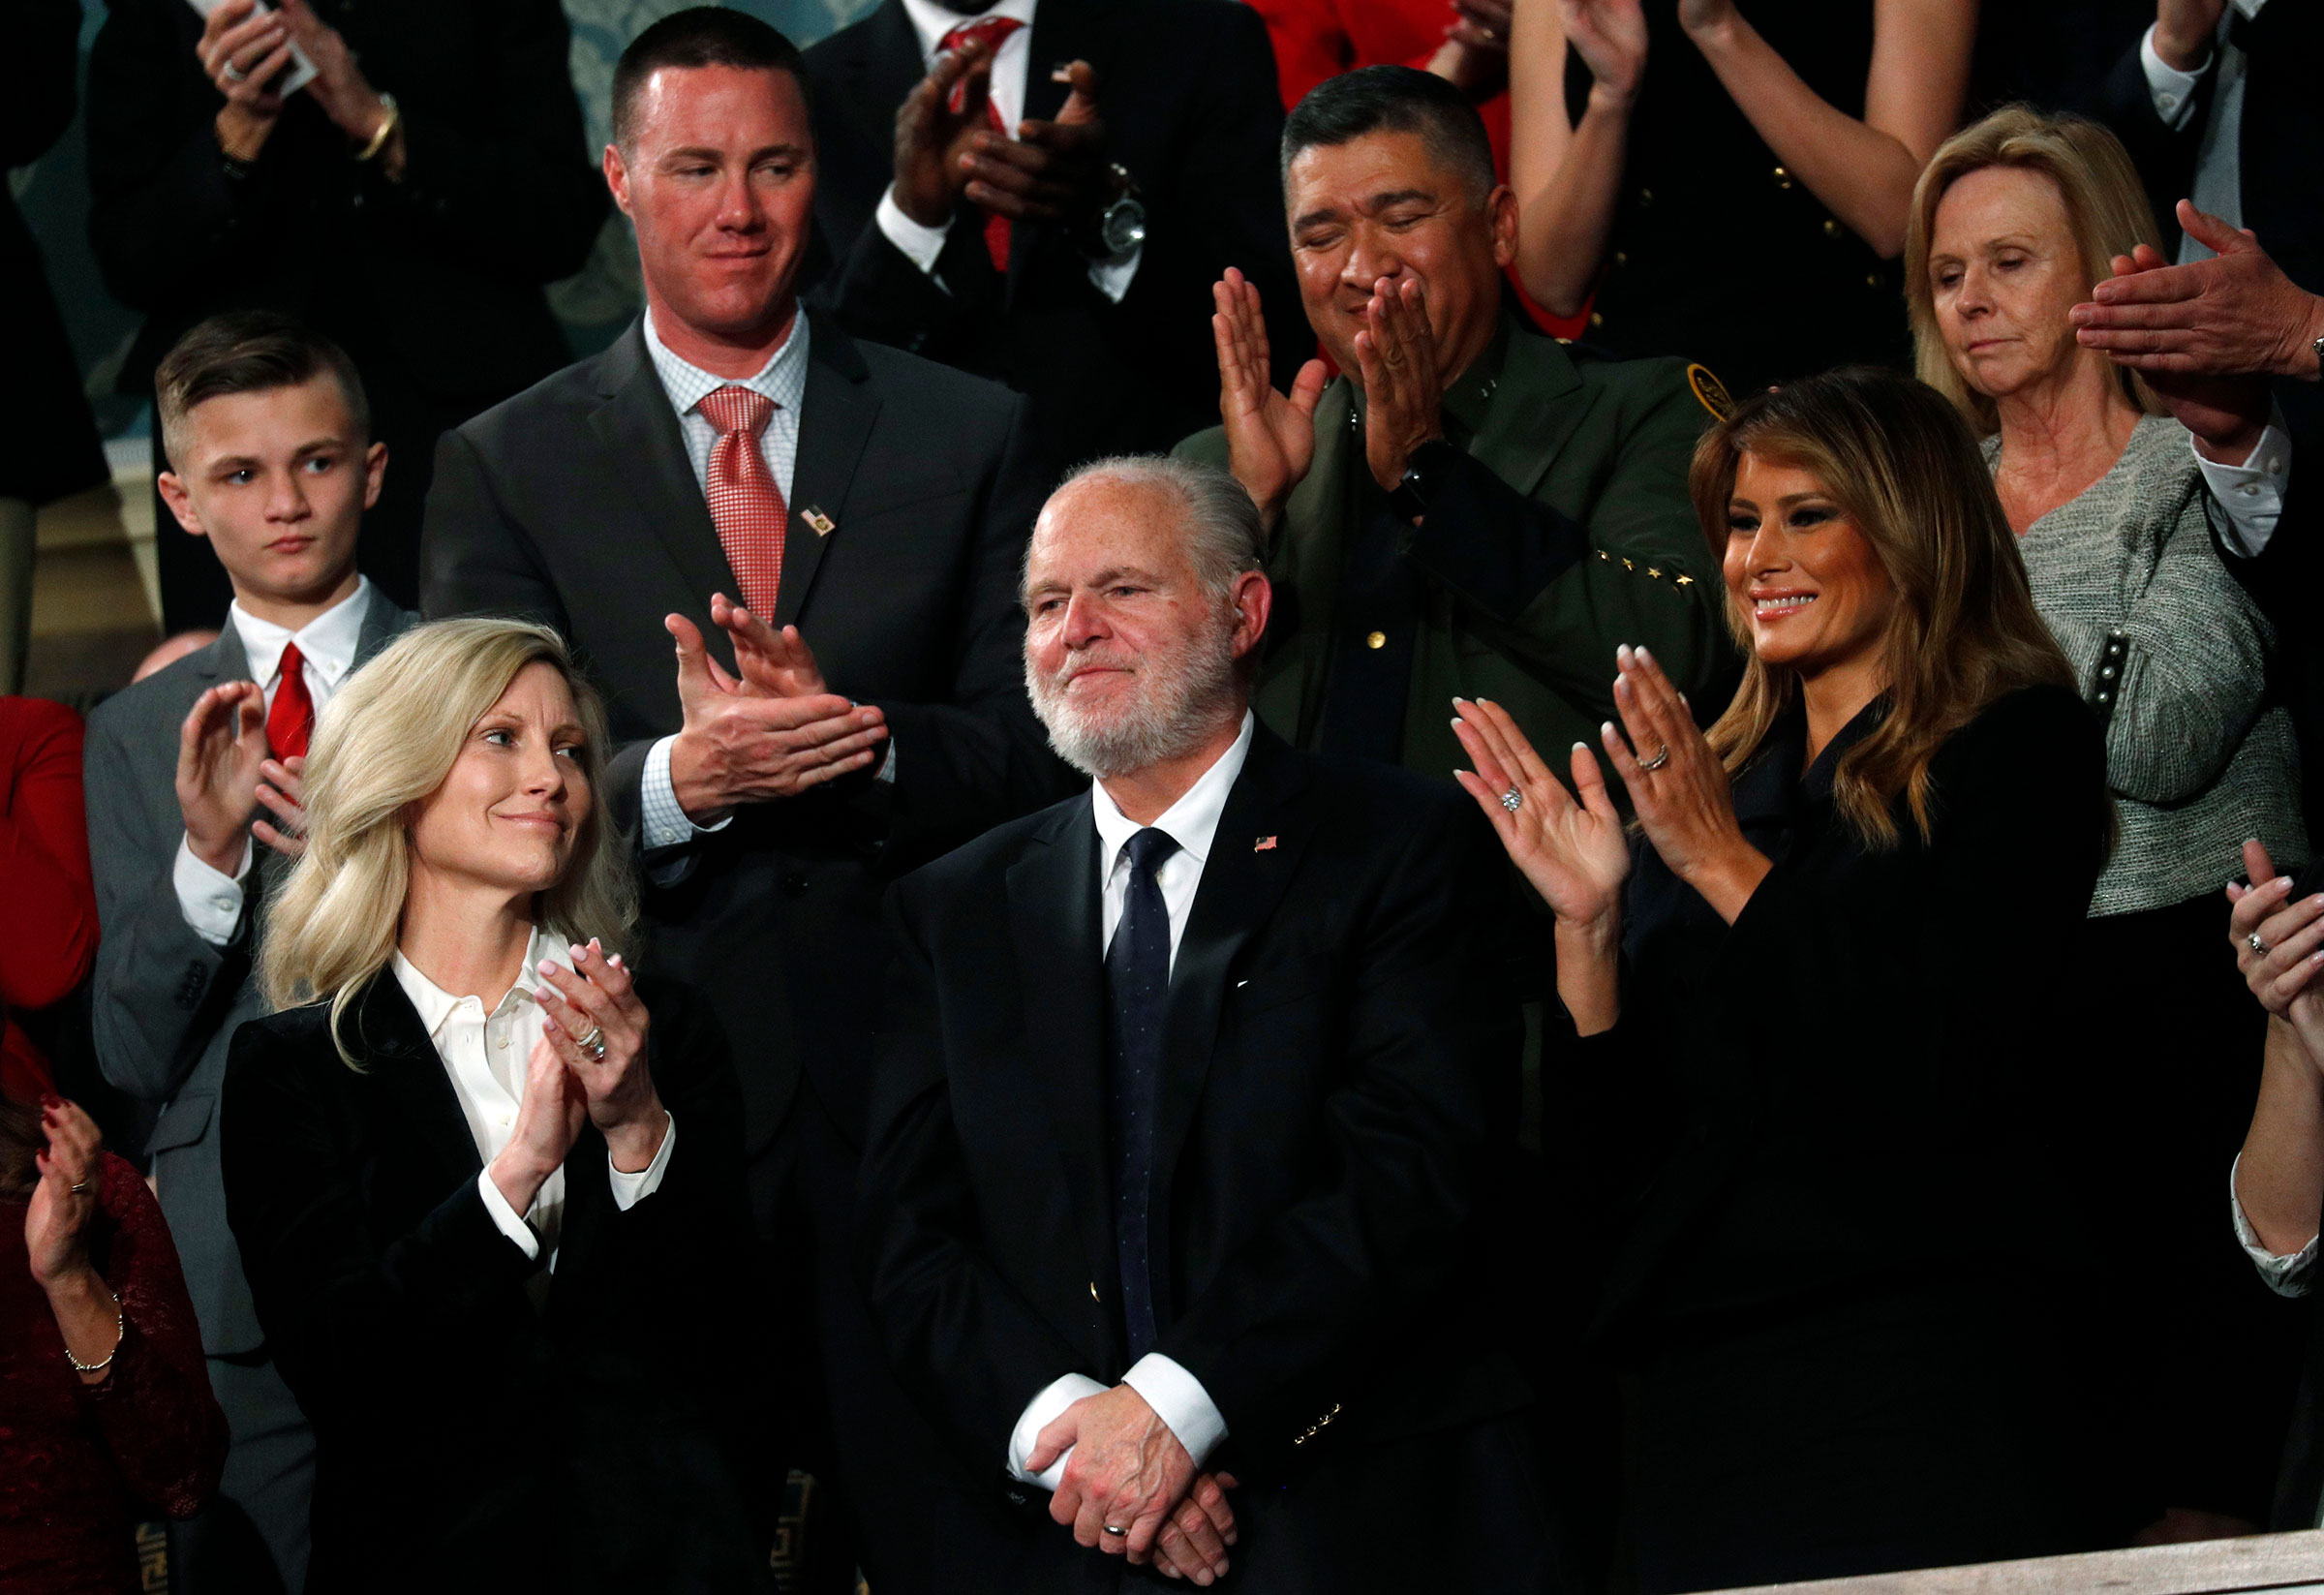 Limbaugh, with wife Kathryn and First Lady Melania Trump, is recognized by President Donald Trump in his State of the Union address in the House chamber on Feb. 4, 2020.